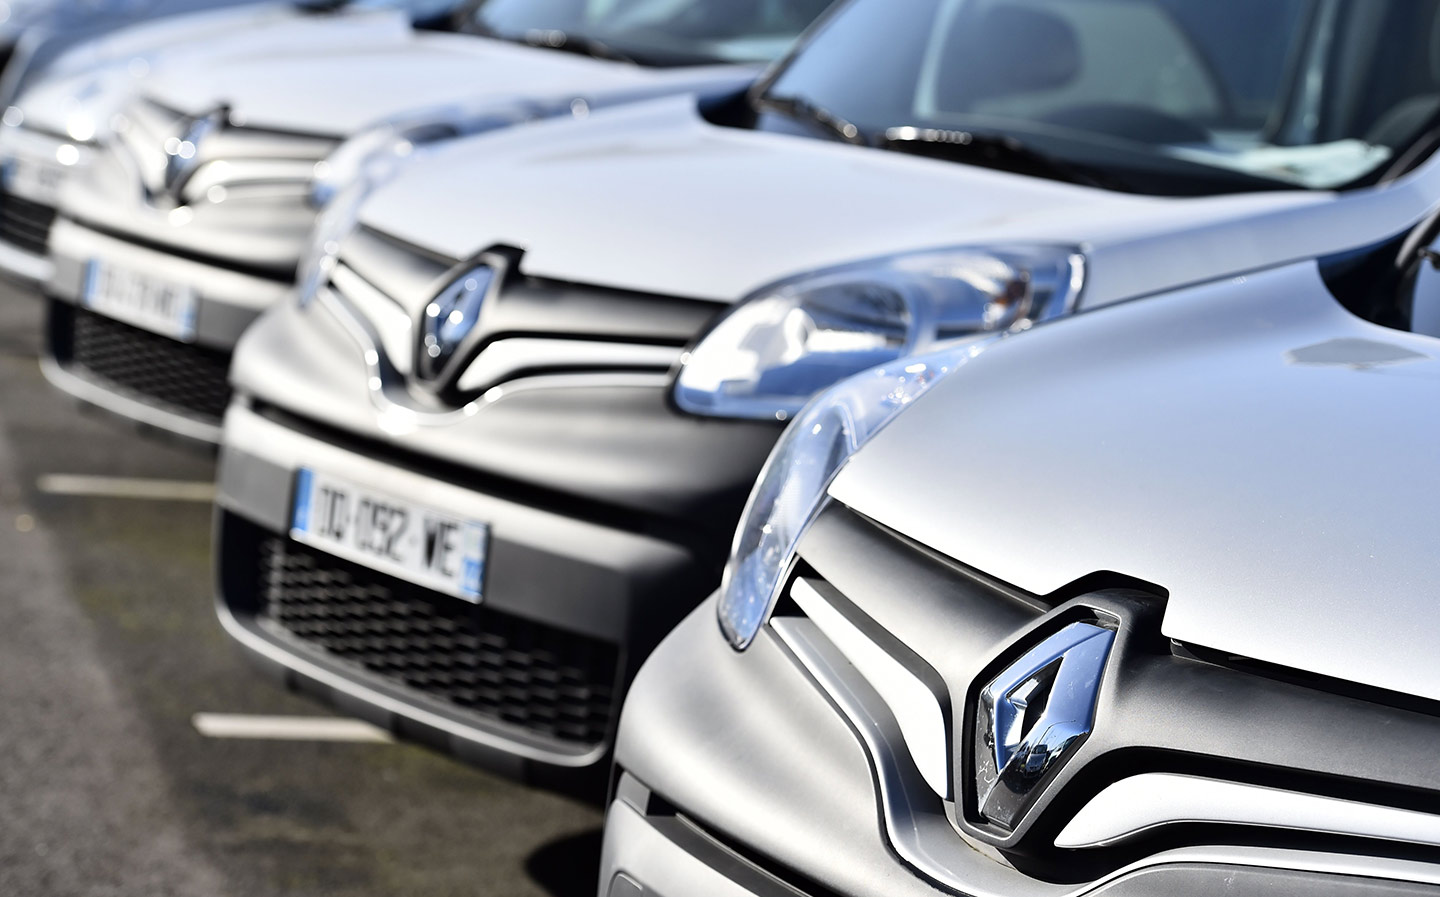 Renault diesels ‘are worst polluters’ according to Which? tests